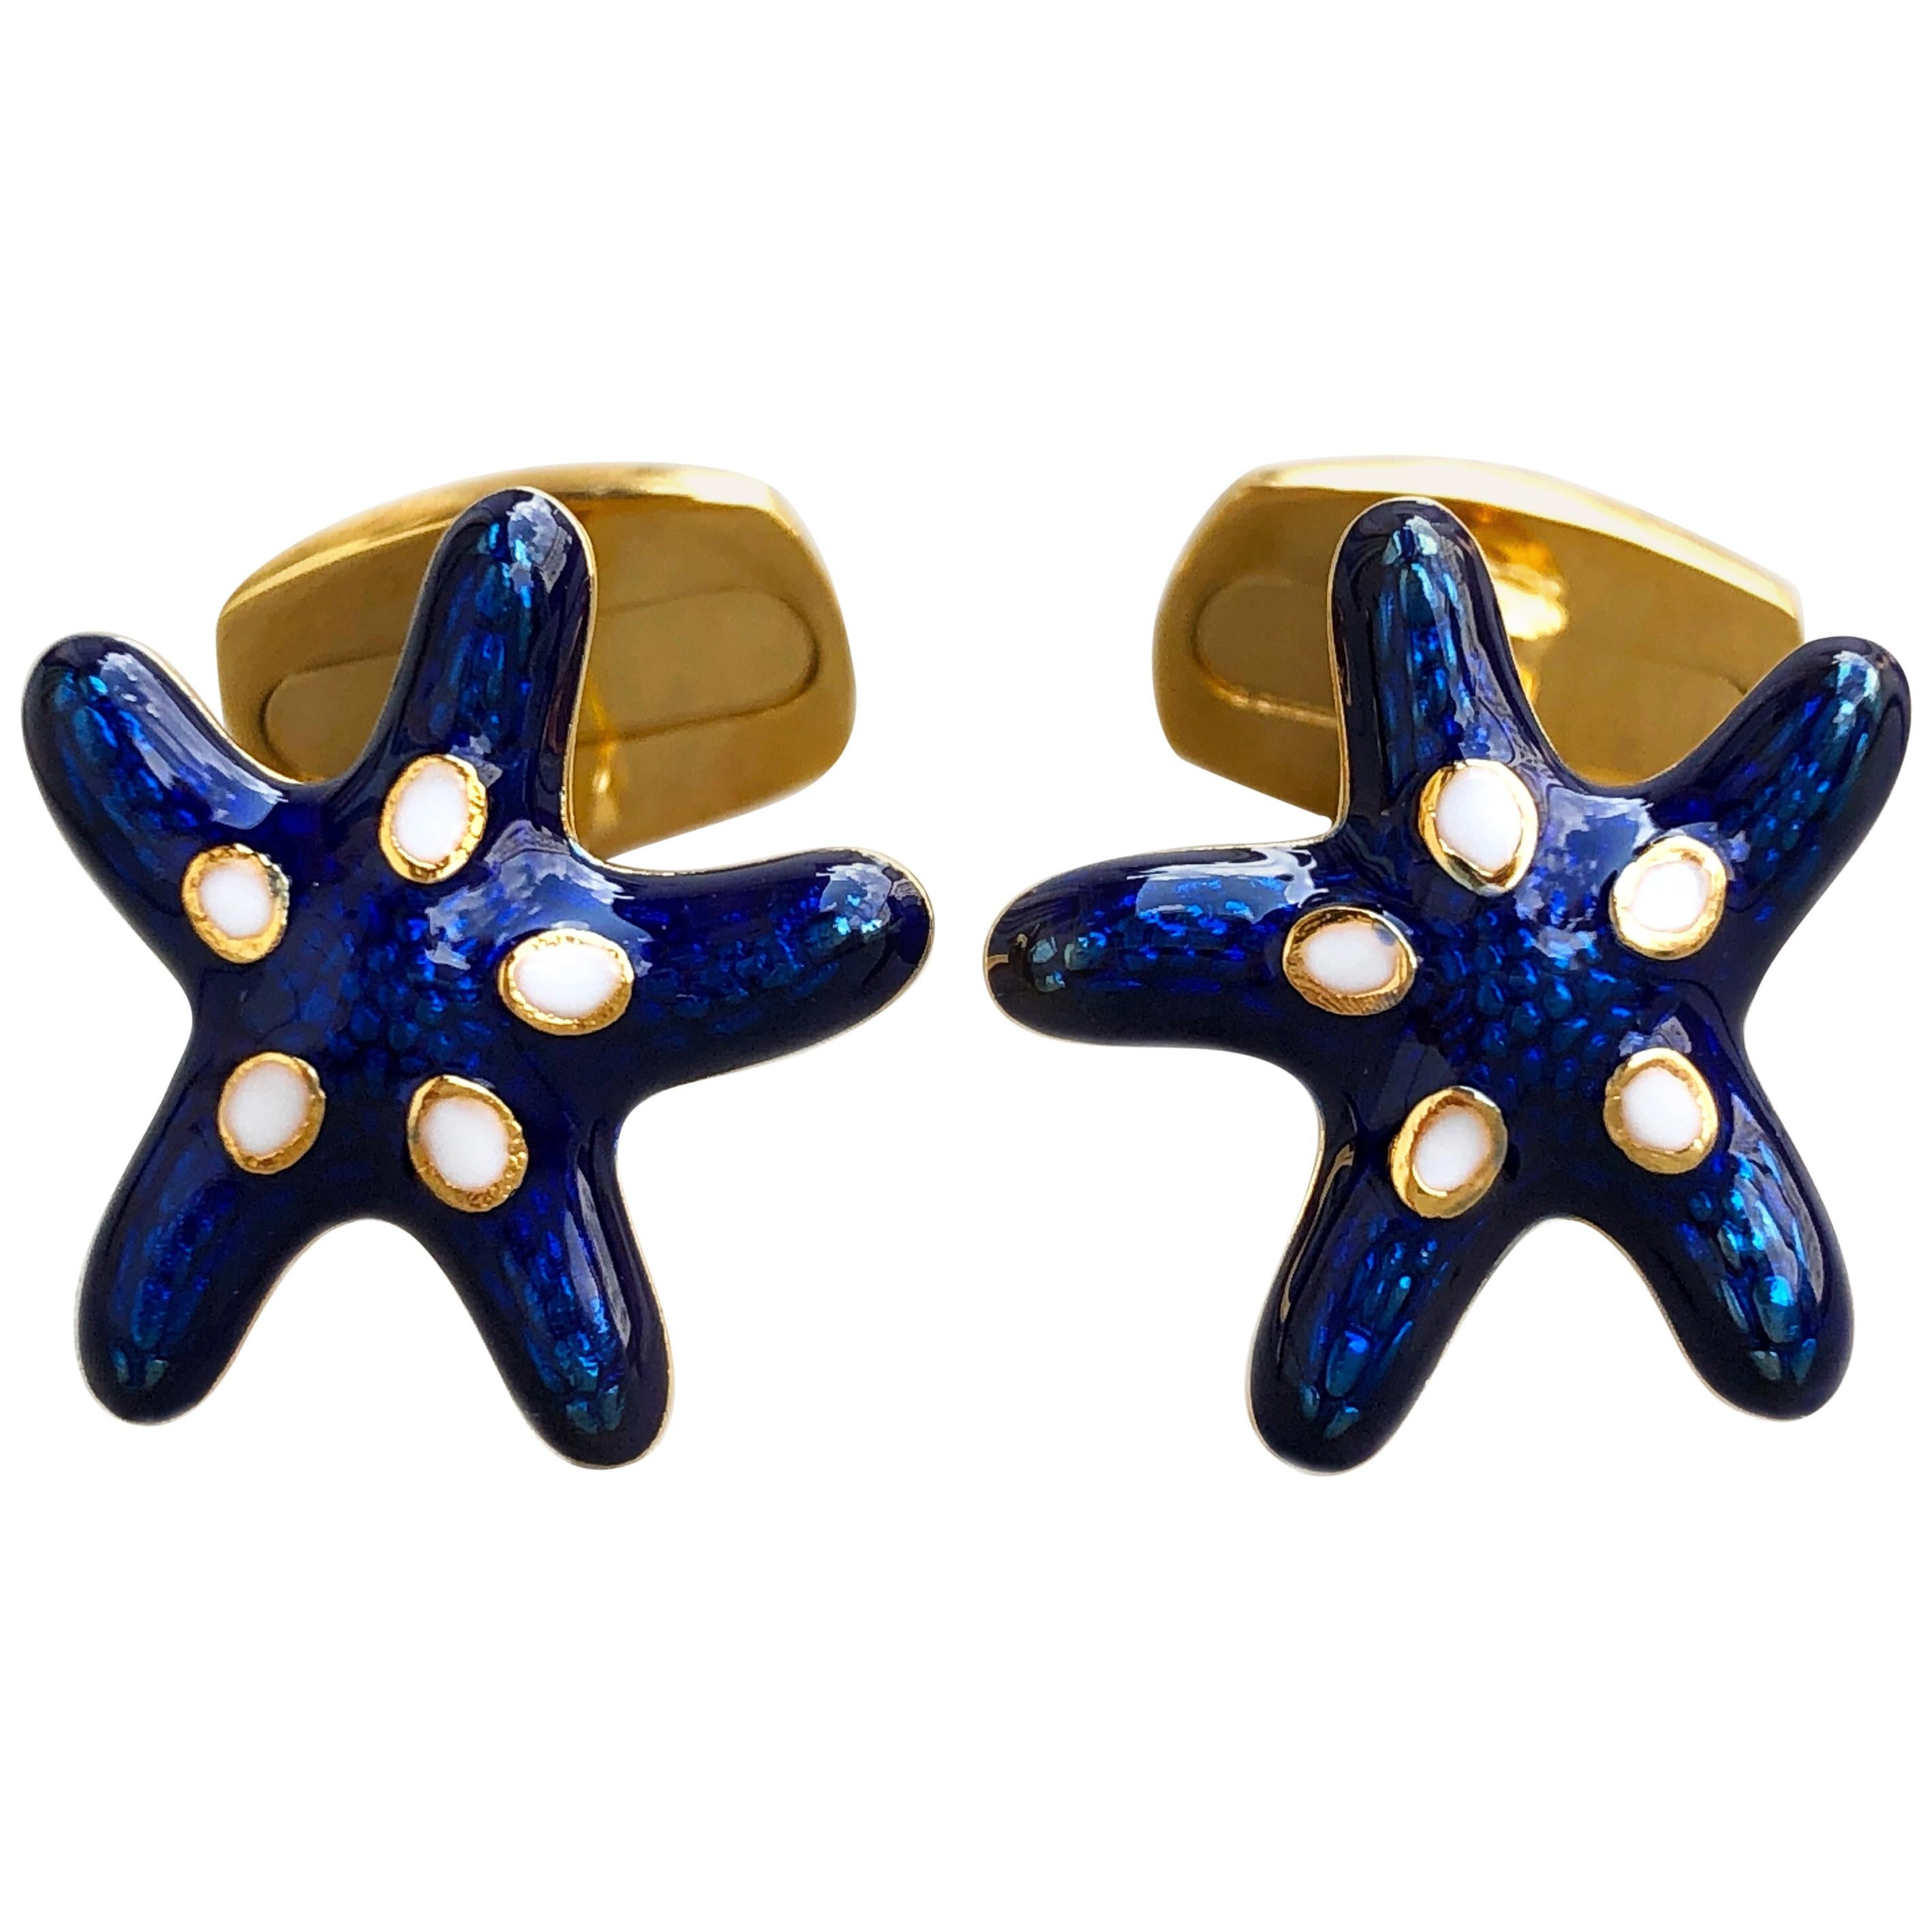 Navy Blue White Enameled Starfish Shaped Sterling Silver Gold-Plated Cufflinks